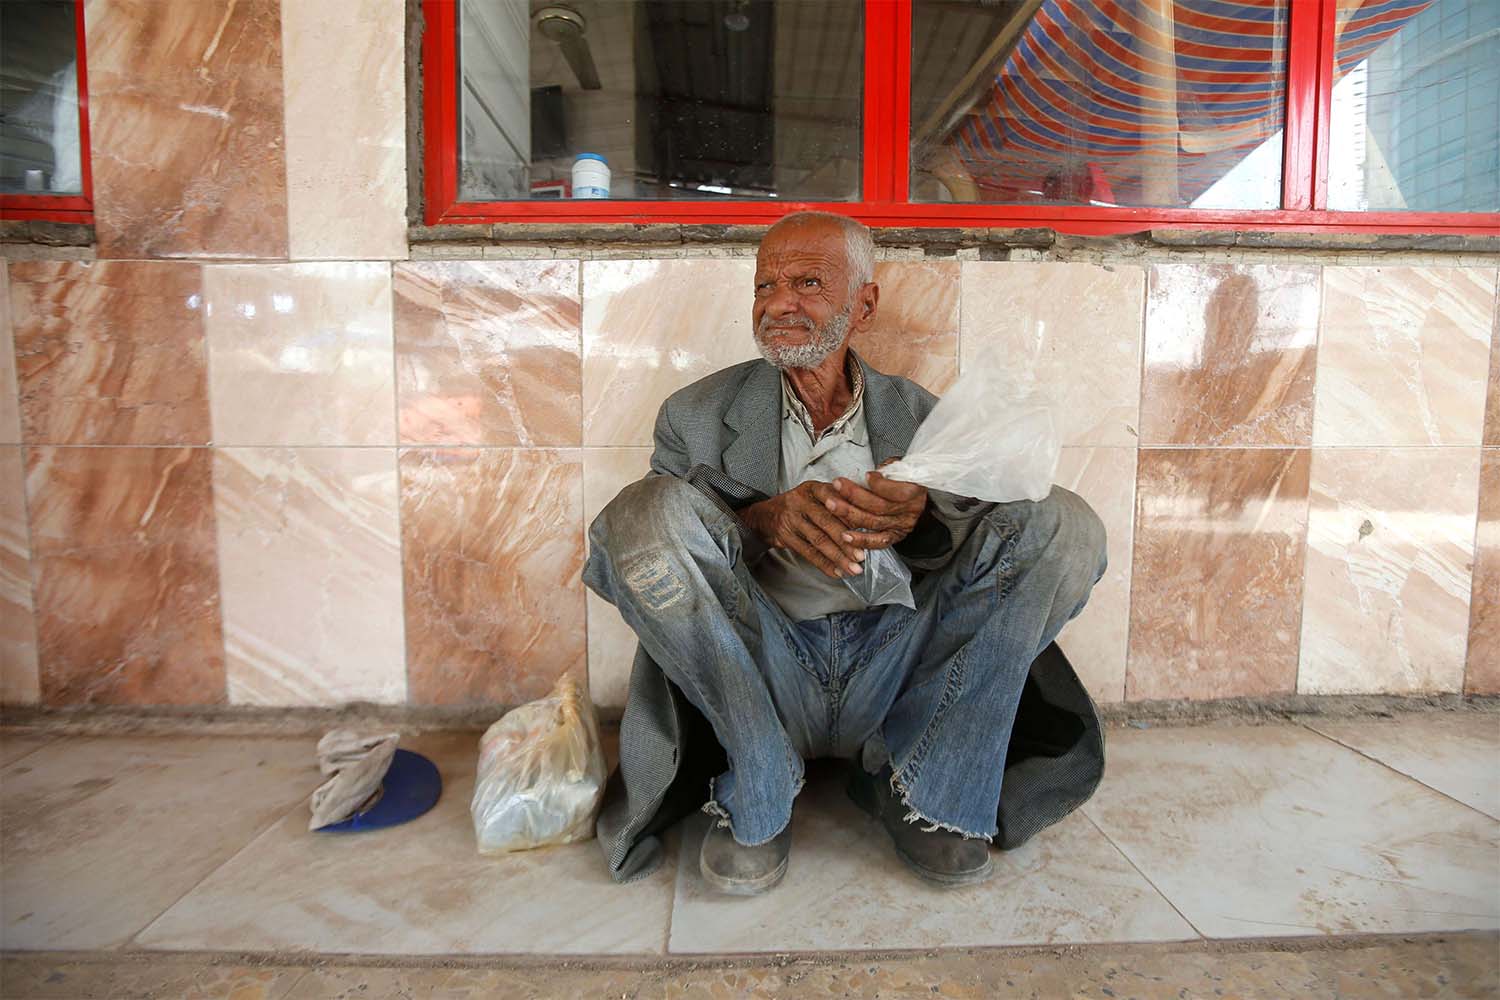 An Iraqi homeless man sits in front of a closed restaurant, during a curfew imposed to prevent the spread of coronavirus disease in Basra